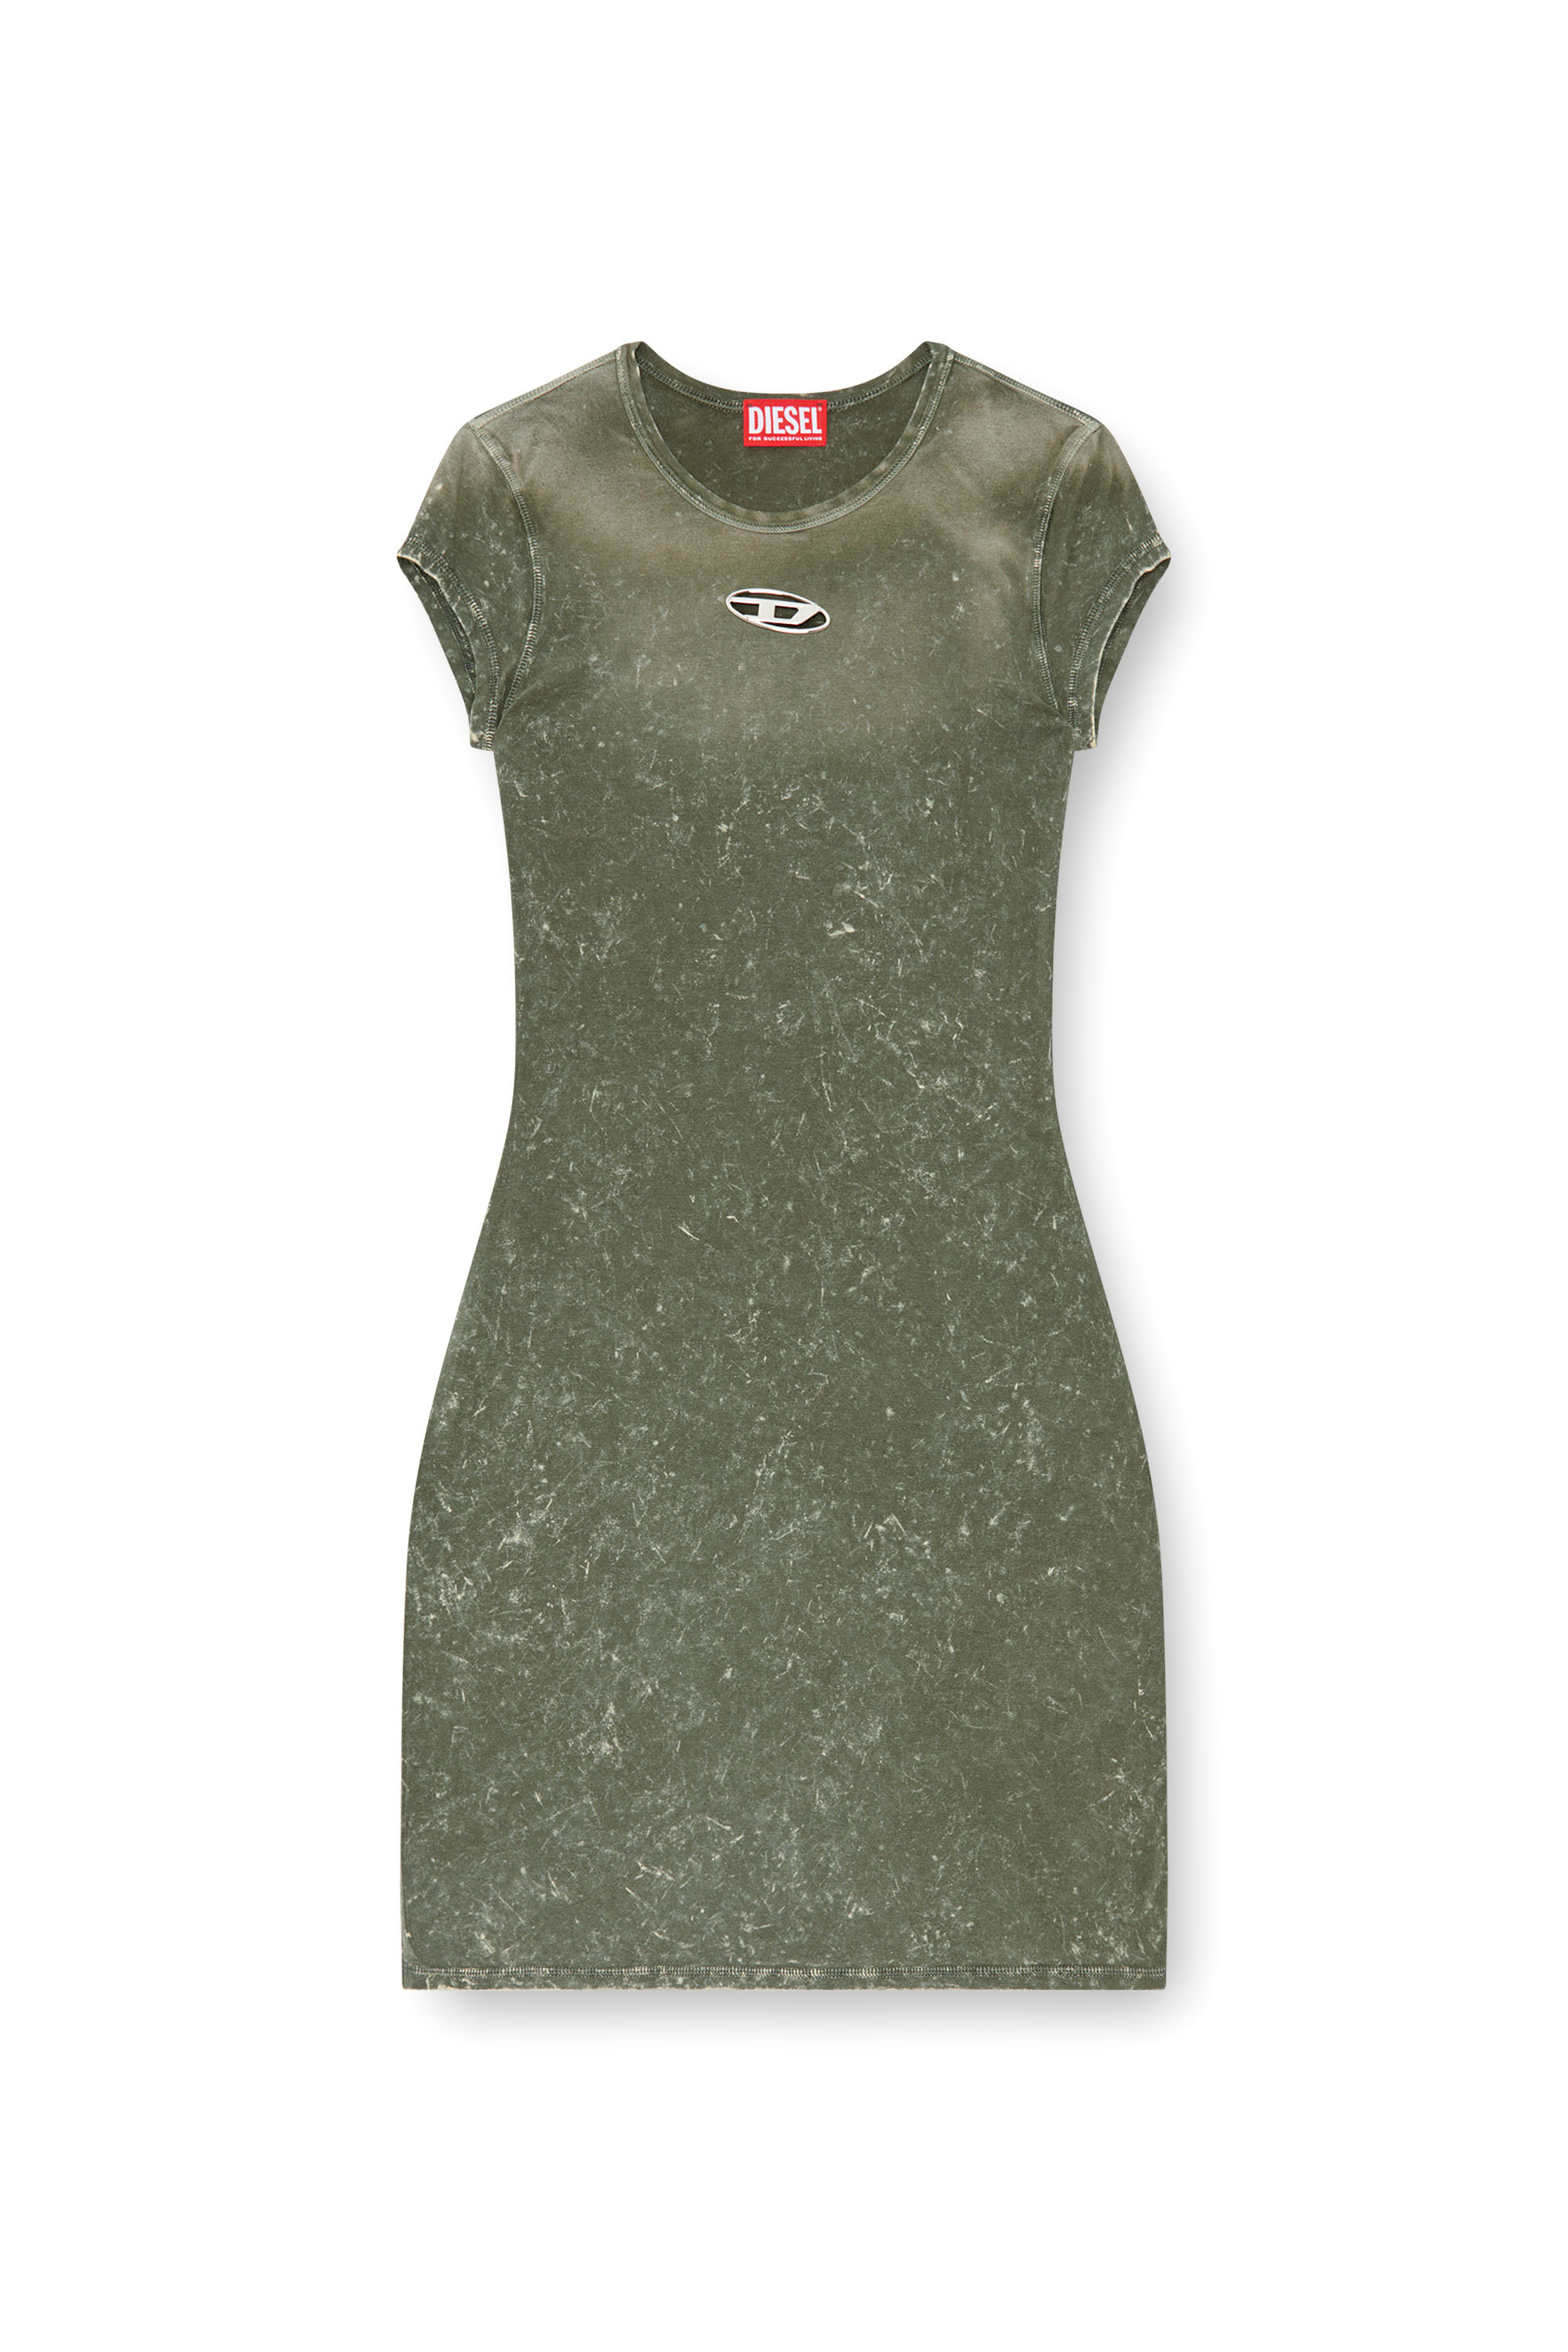 Diesel - D-ANGIEL-P1, Woman Short dress in marbled stretch jersey in Green - Image 5